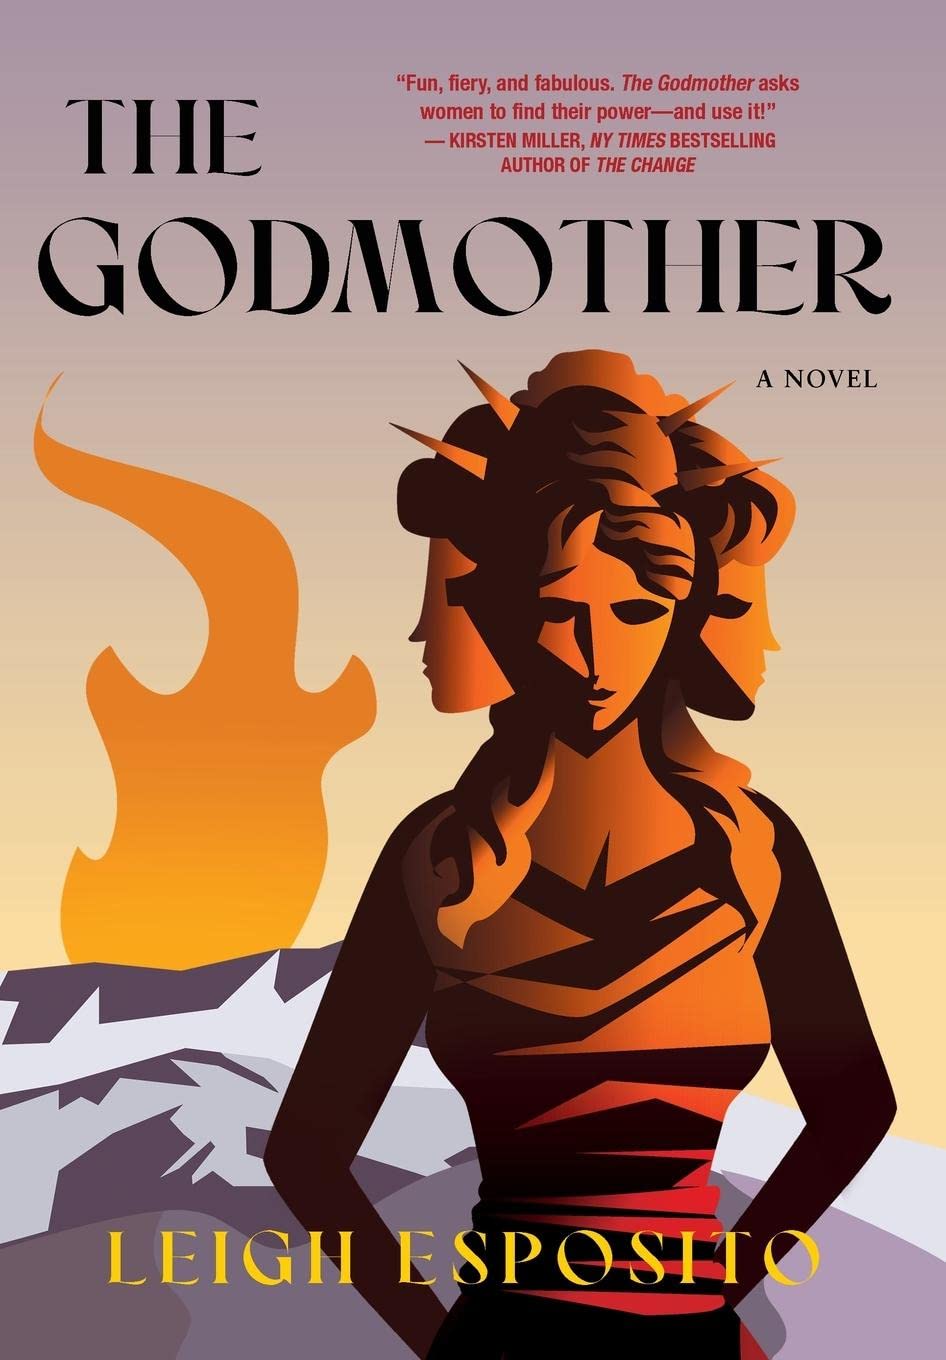 "The Godmother" book cover